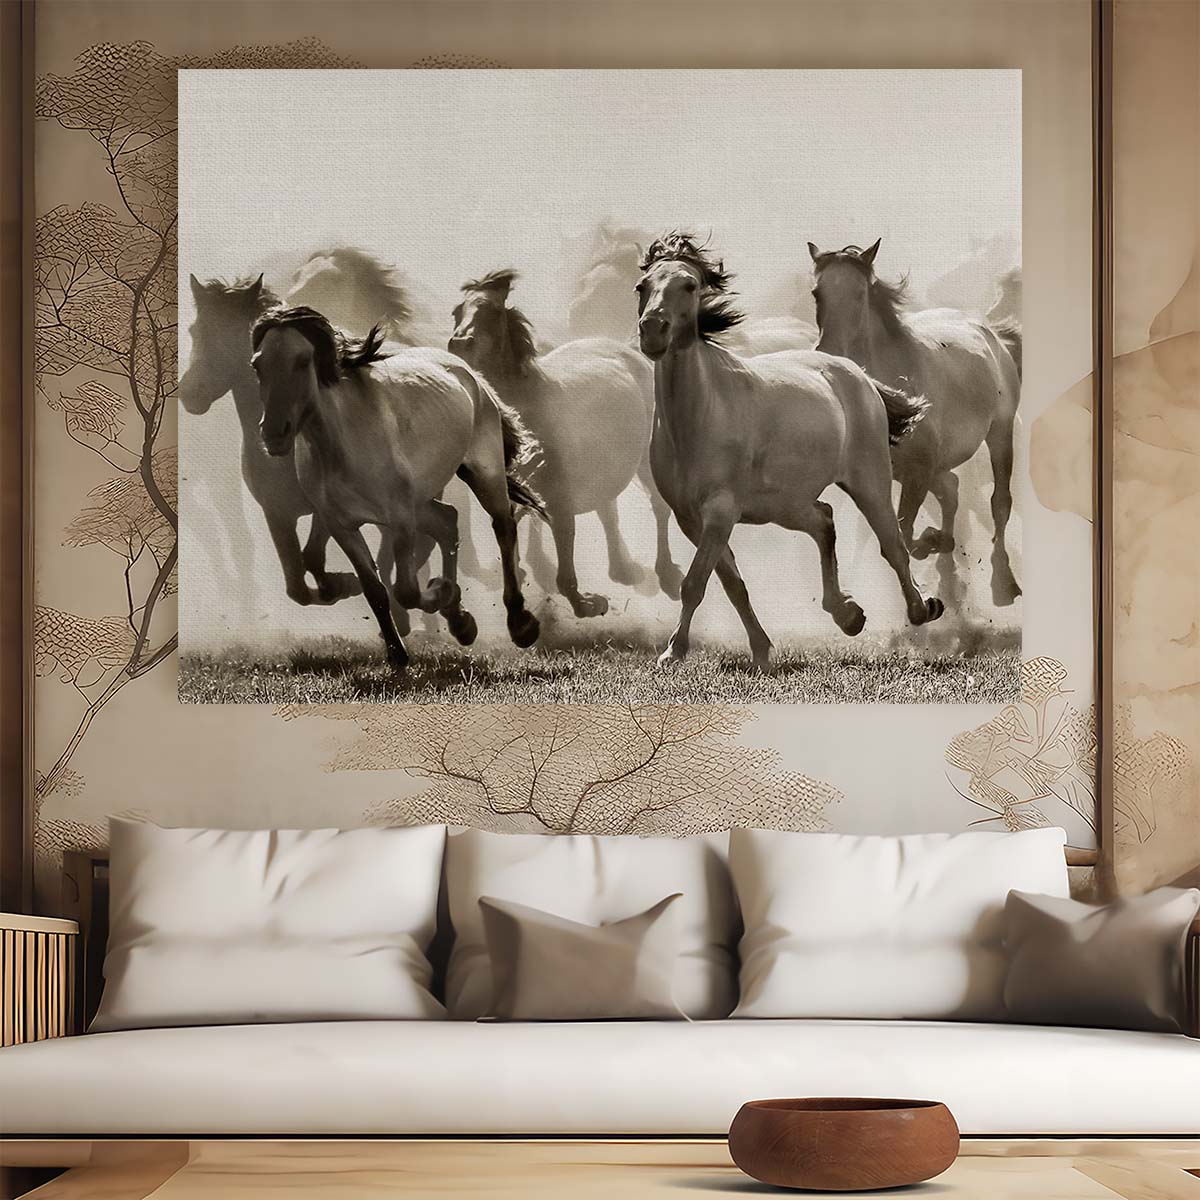 Dramatic HighSpeed Horse Herd Wall Art by Luxuriance Designs. Made in USA.